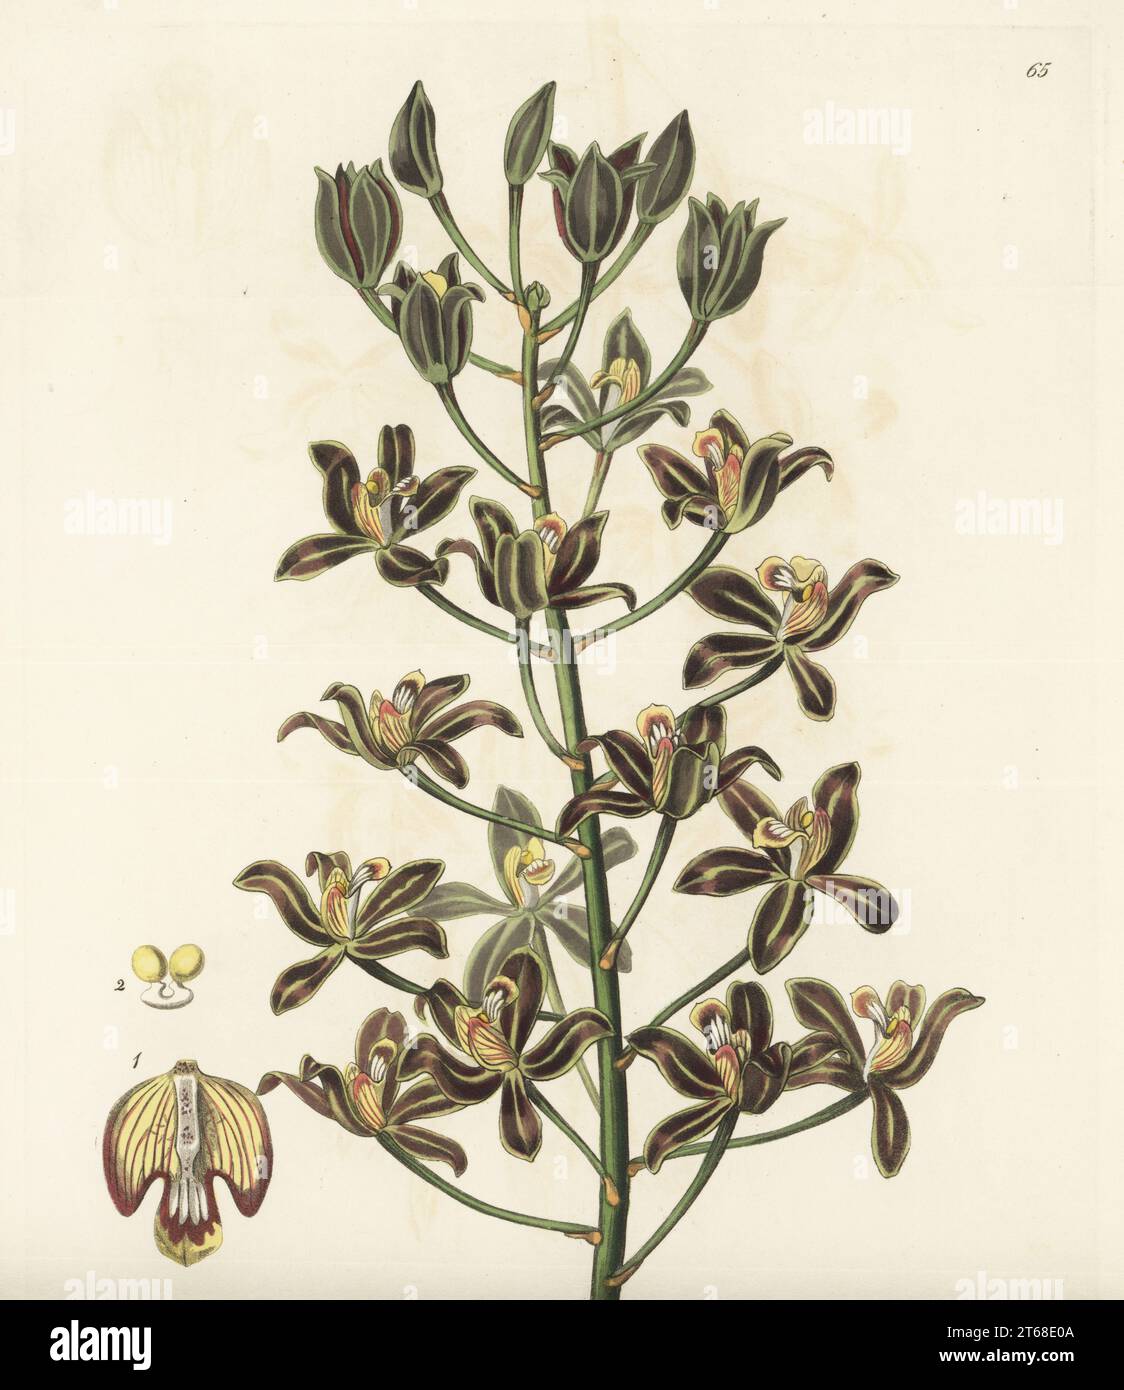 Many-flowered letter-leaf orchid or multiflowered grammatophyllum, Grammatophyllum multiflorum. Native to the Philippines, and sent from Manila by plant hunter Hugh Cuming. Handcoloured copperplate engraving by George Barclay after a botanical illustration by Sarah Drake from Edwards Botanical Register, edited by John Lindley, published by James Ridgway, London, 1839. Stock Photo